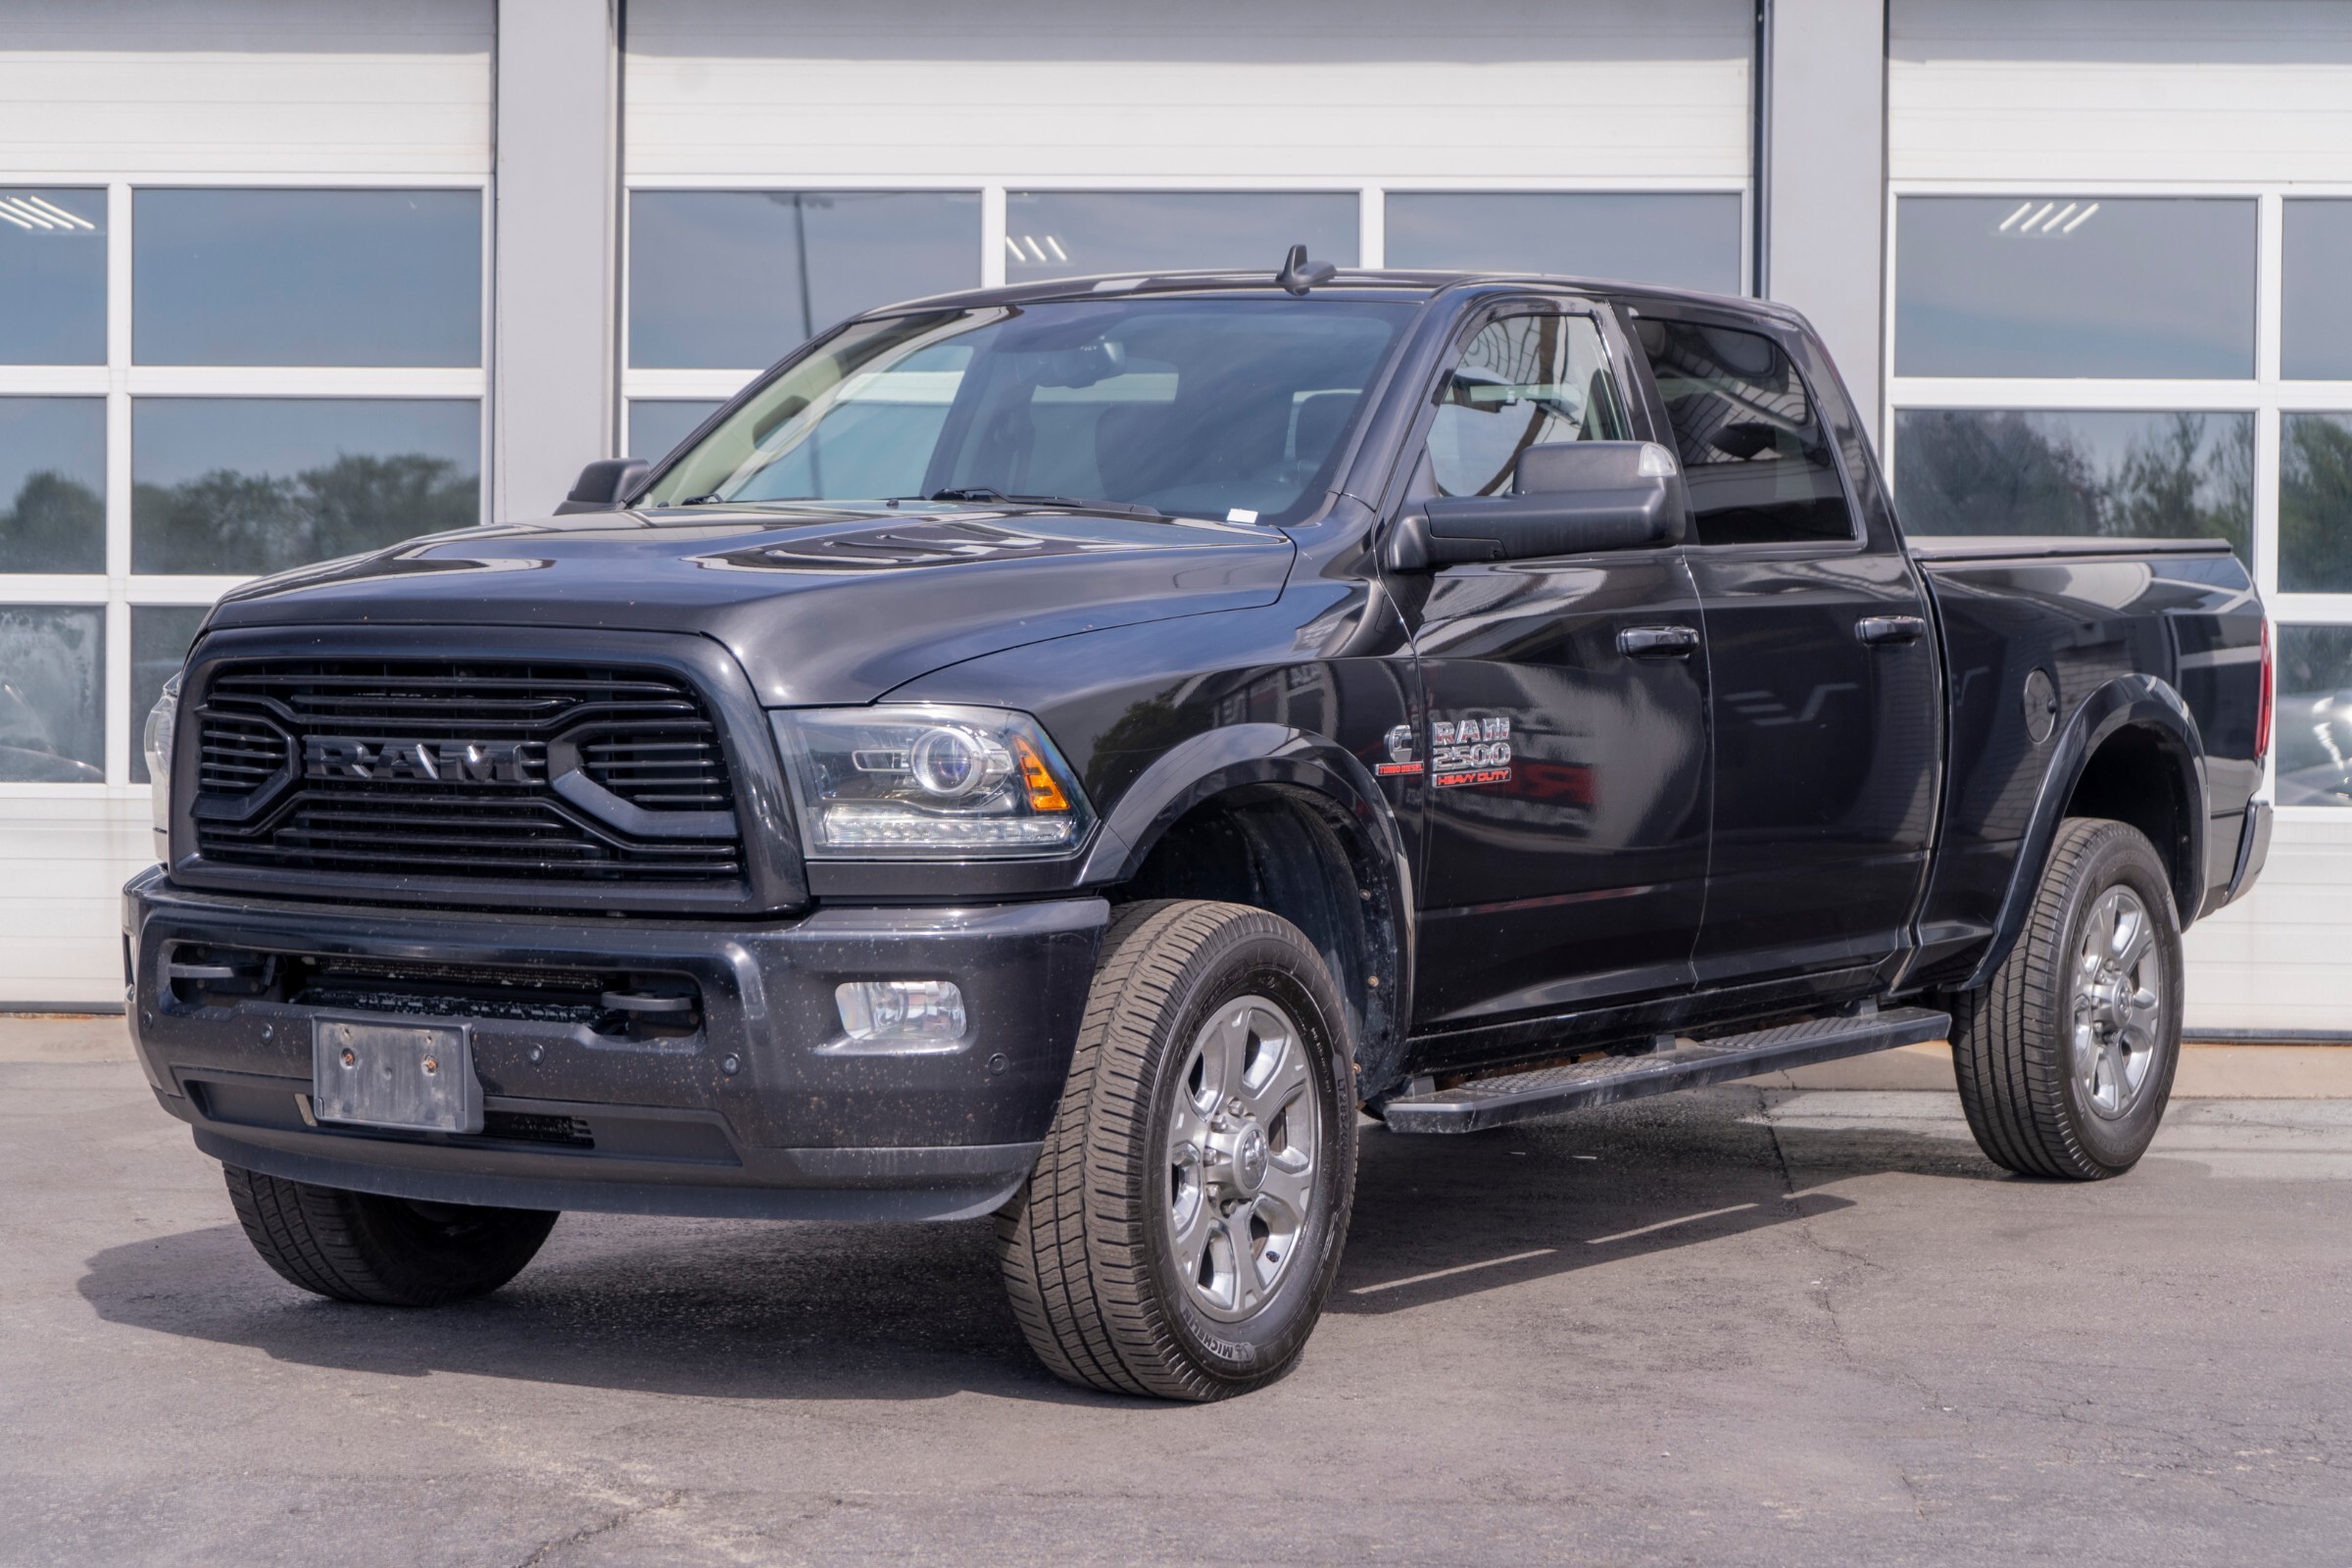 2018 Ram 2500 Laramie| 4X4| One Owner| No Accidents| Leather| 